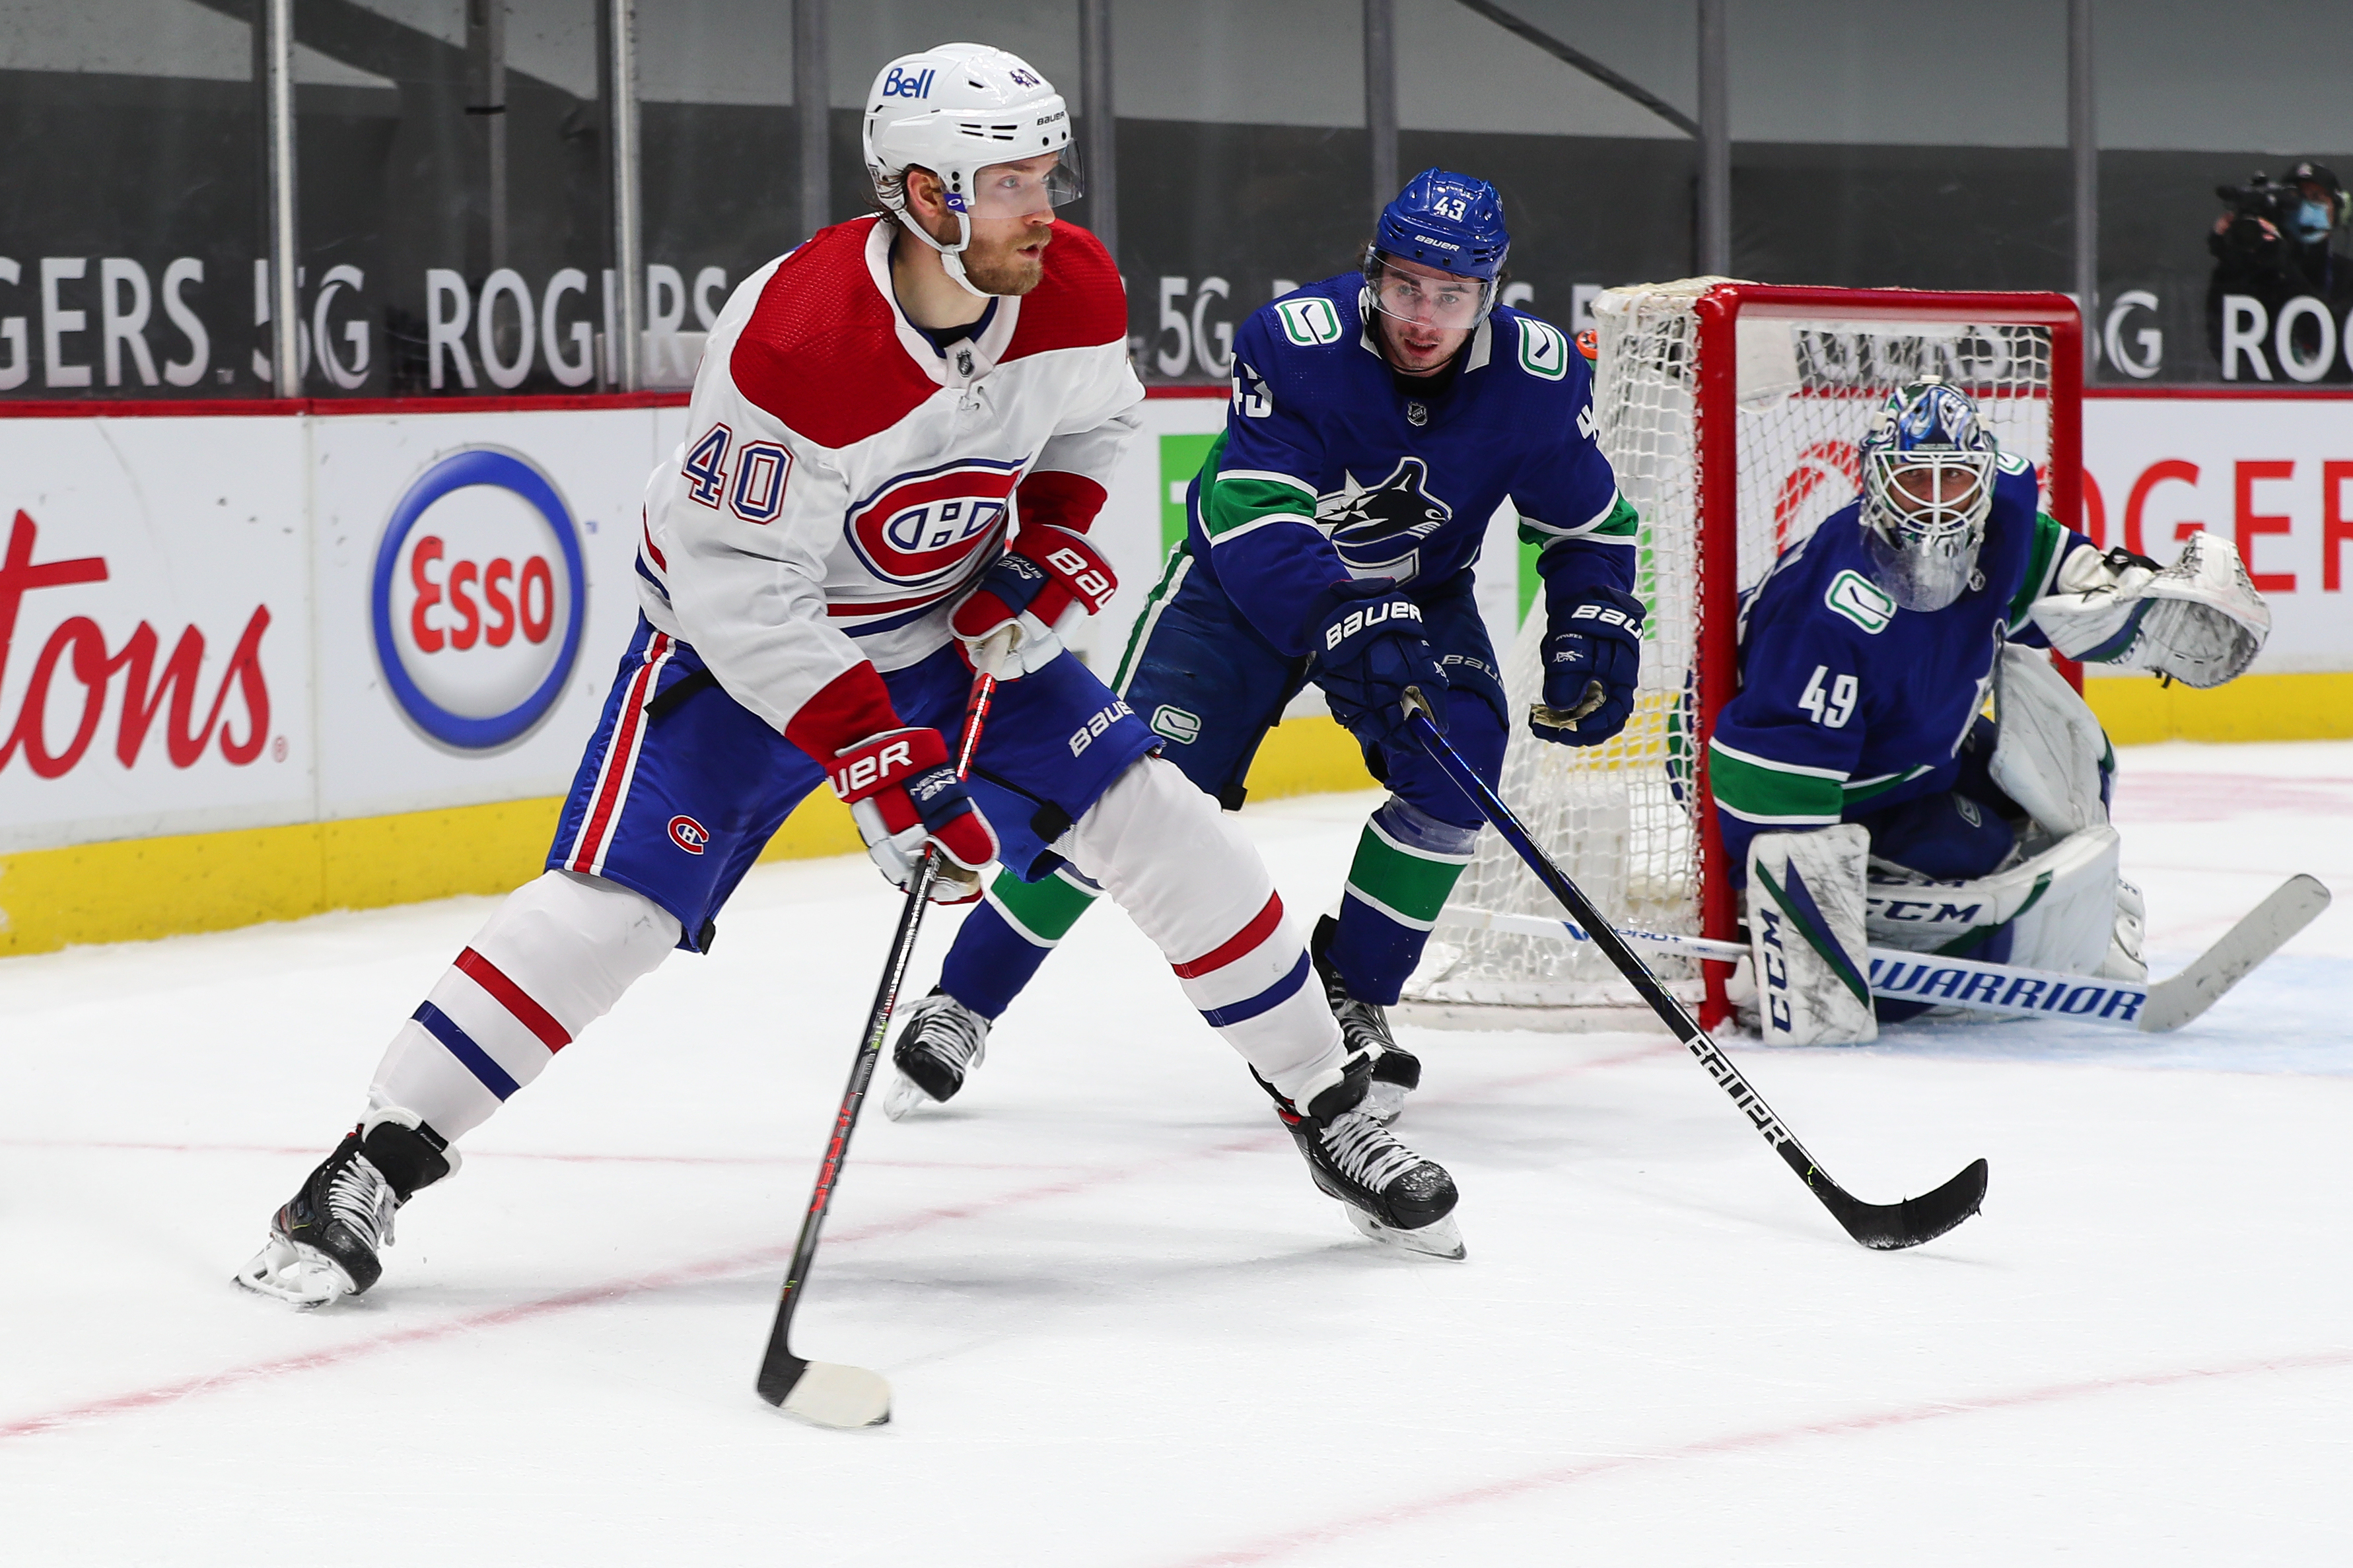 Montreal Canadiens Right Wing Joel Armia (40) plays the puck while watched by Vancouver Canucks Defenceman Quinn Hughes (43) during their NHL game at Rogers Arena on January 20, 2021 in Vancouver, British Columbia, Canada.